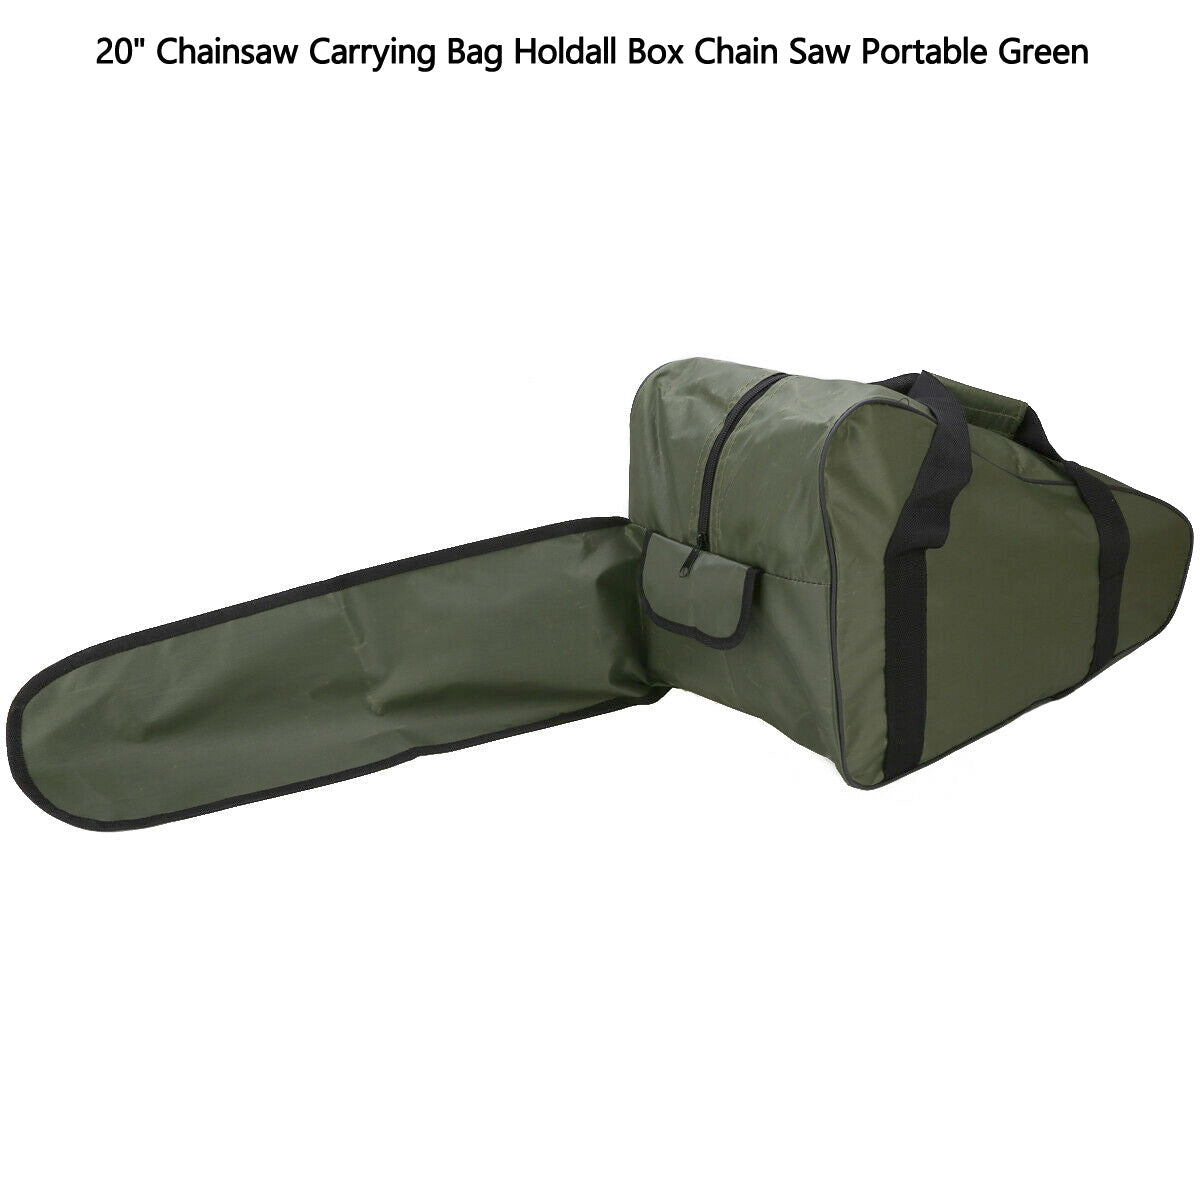 20" Chainsaw Carrying Bag Holdall Box Chain Saw Portable Green